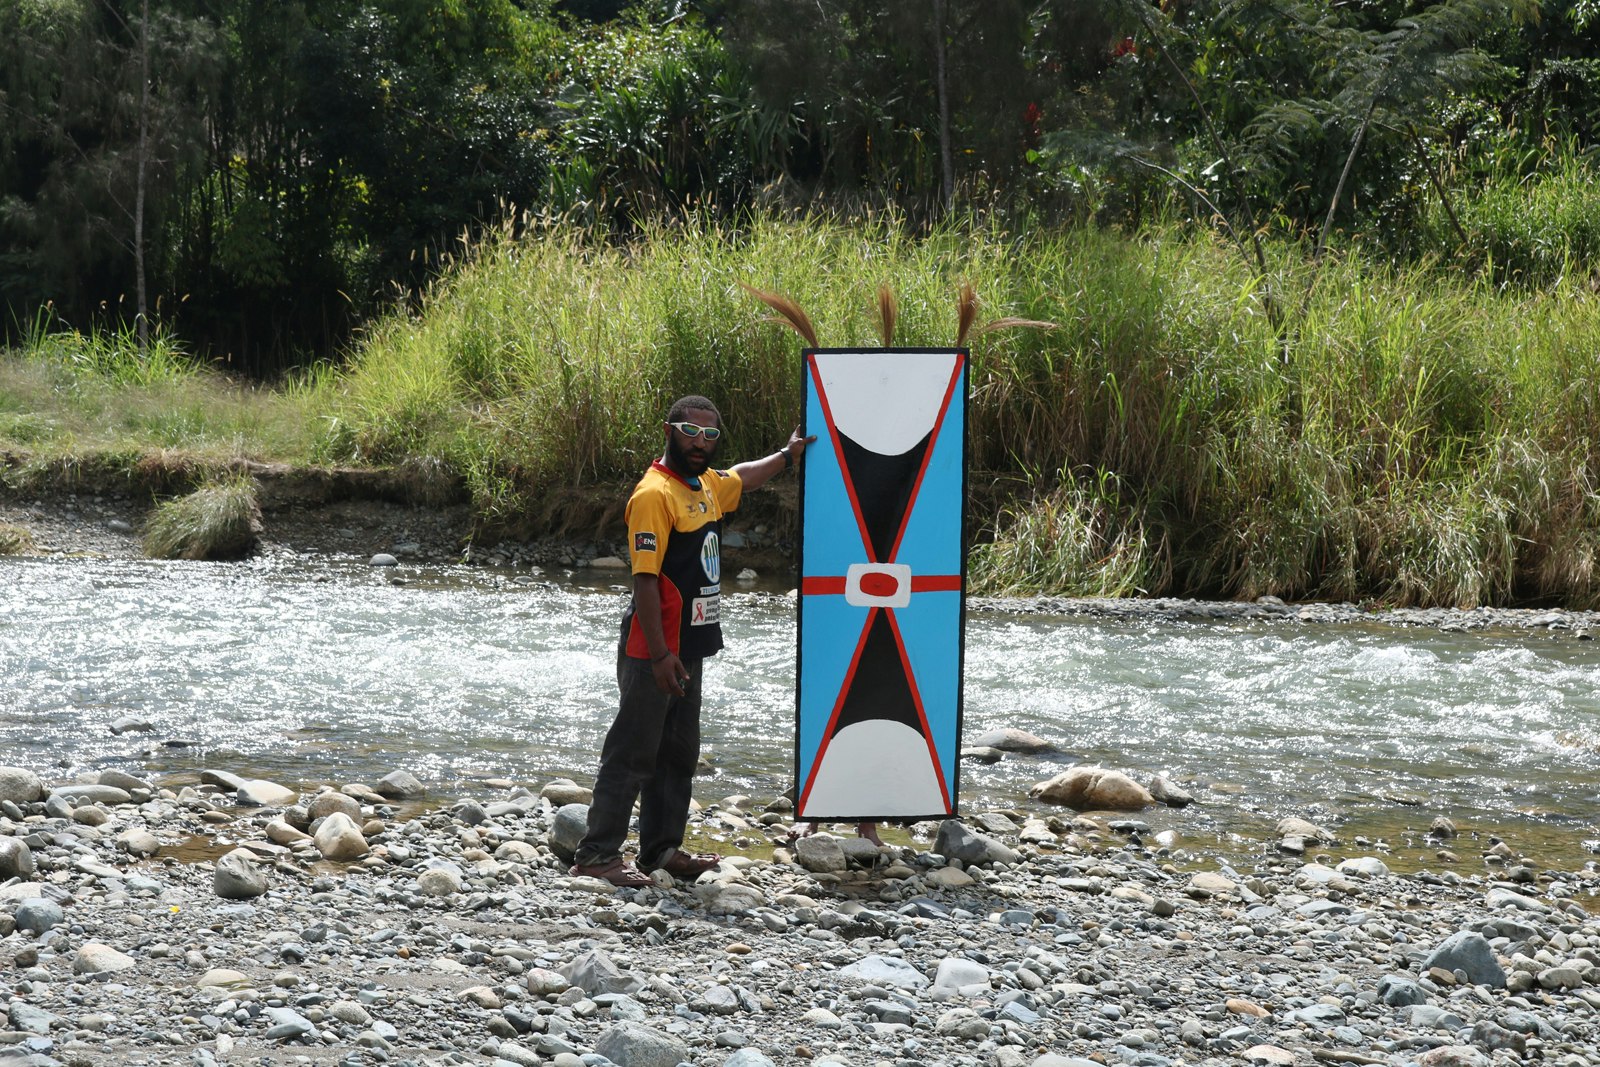 A dark-skinned Pasifika man wearing a jersey, trousers and sunglasses stands on a rocky riverbed, holding up a blue kuman.